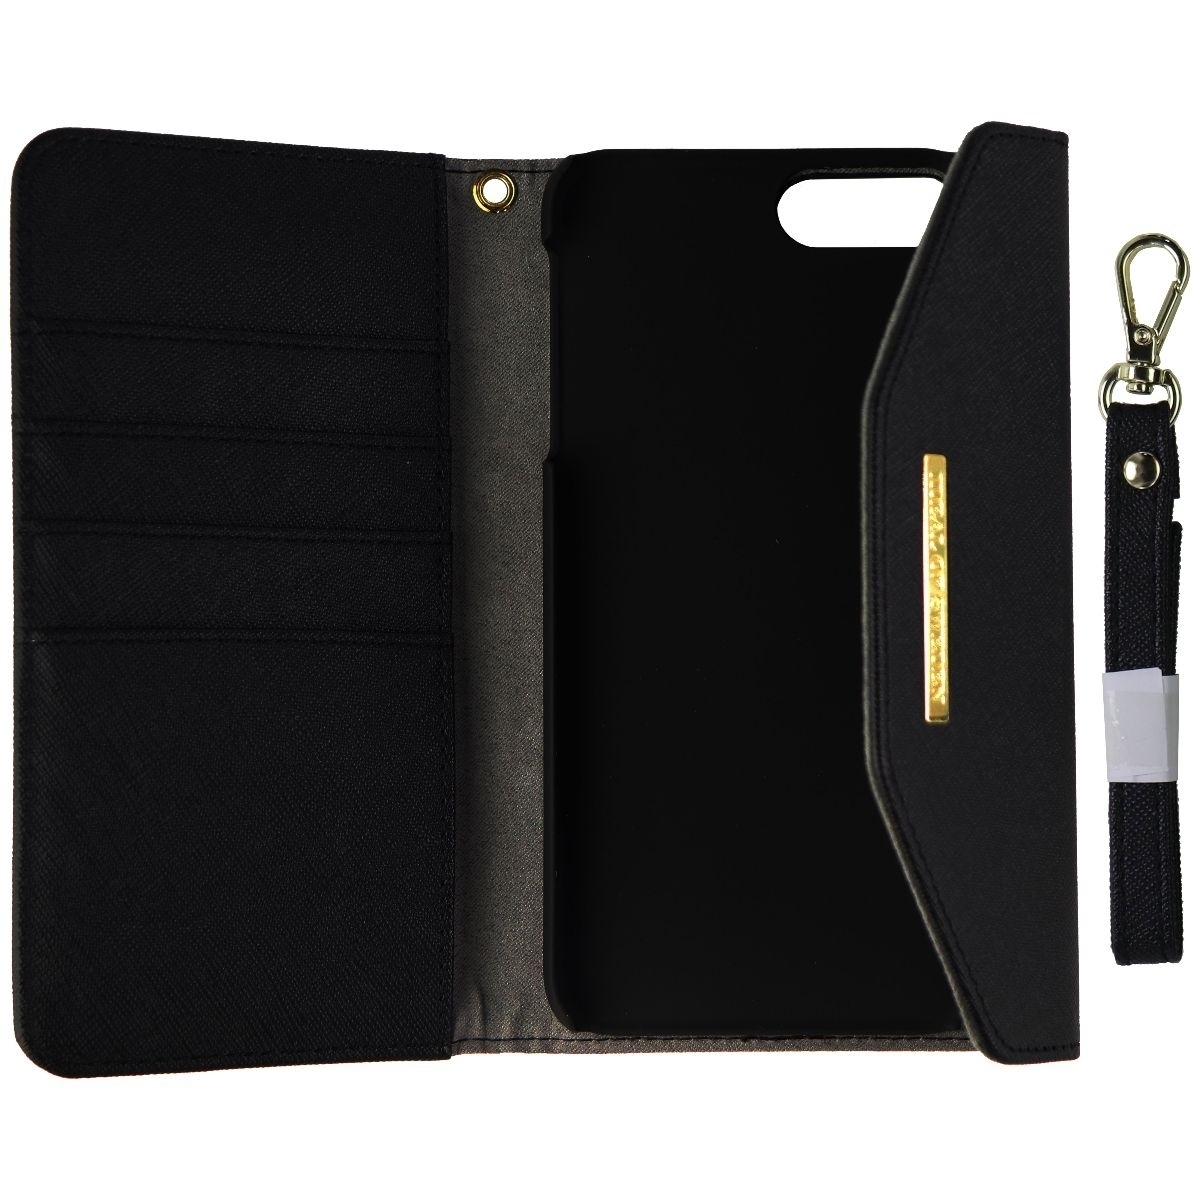 IDeal Of Sweden Mayfair Clutch Wallet Case For IPhone 8 Plus/7 Plus - Black